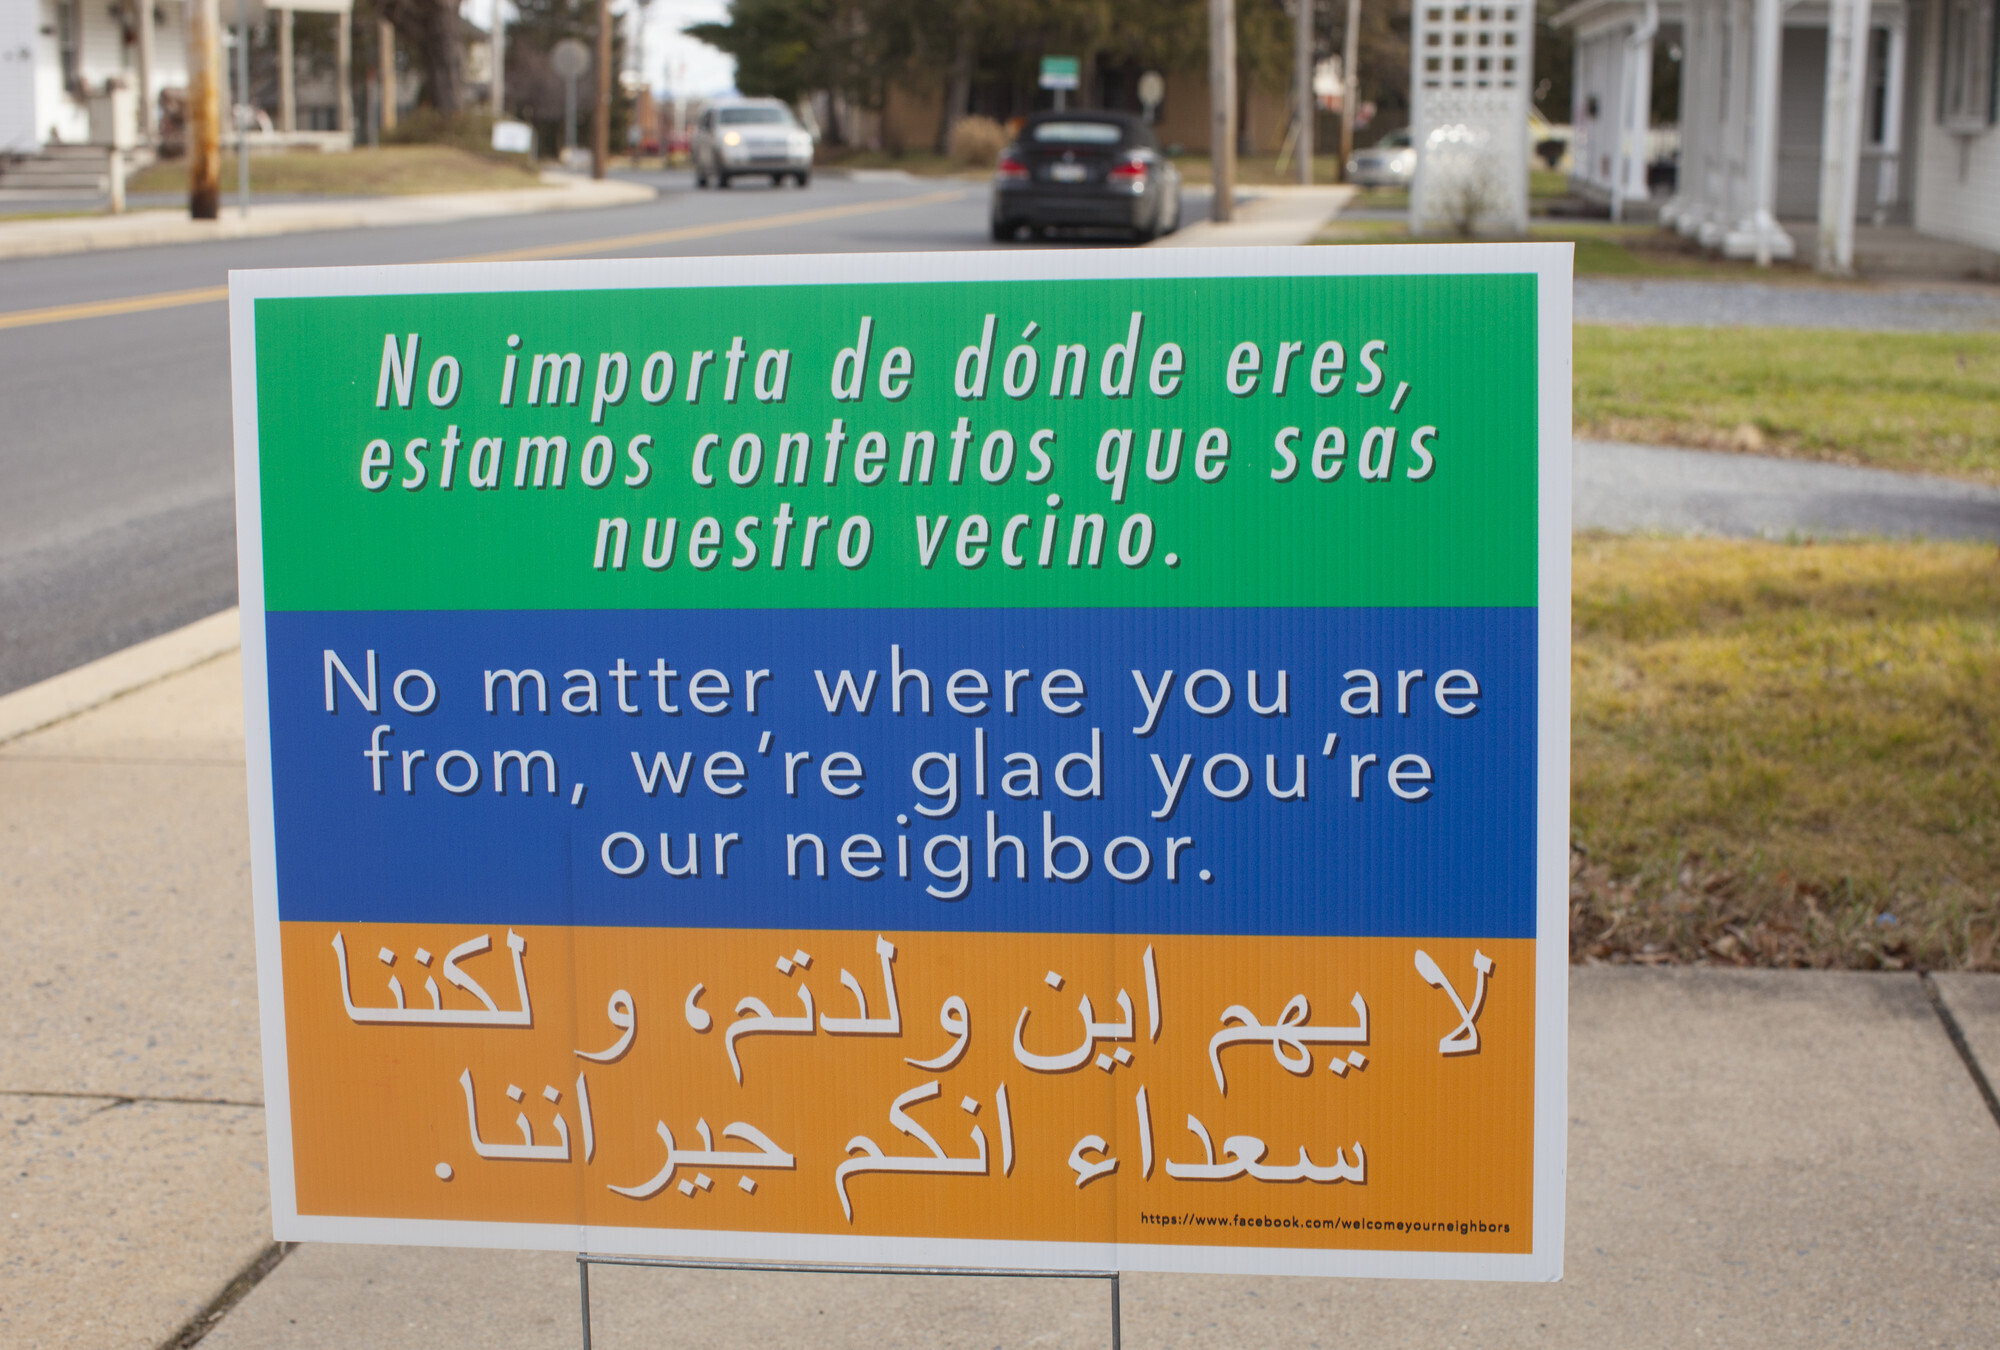 A sign reads "No matter where you are from, we are glad you are our neighbor"